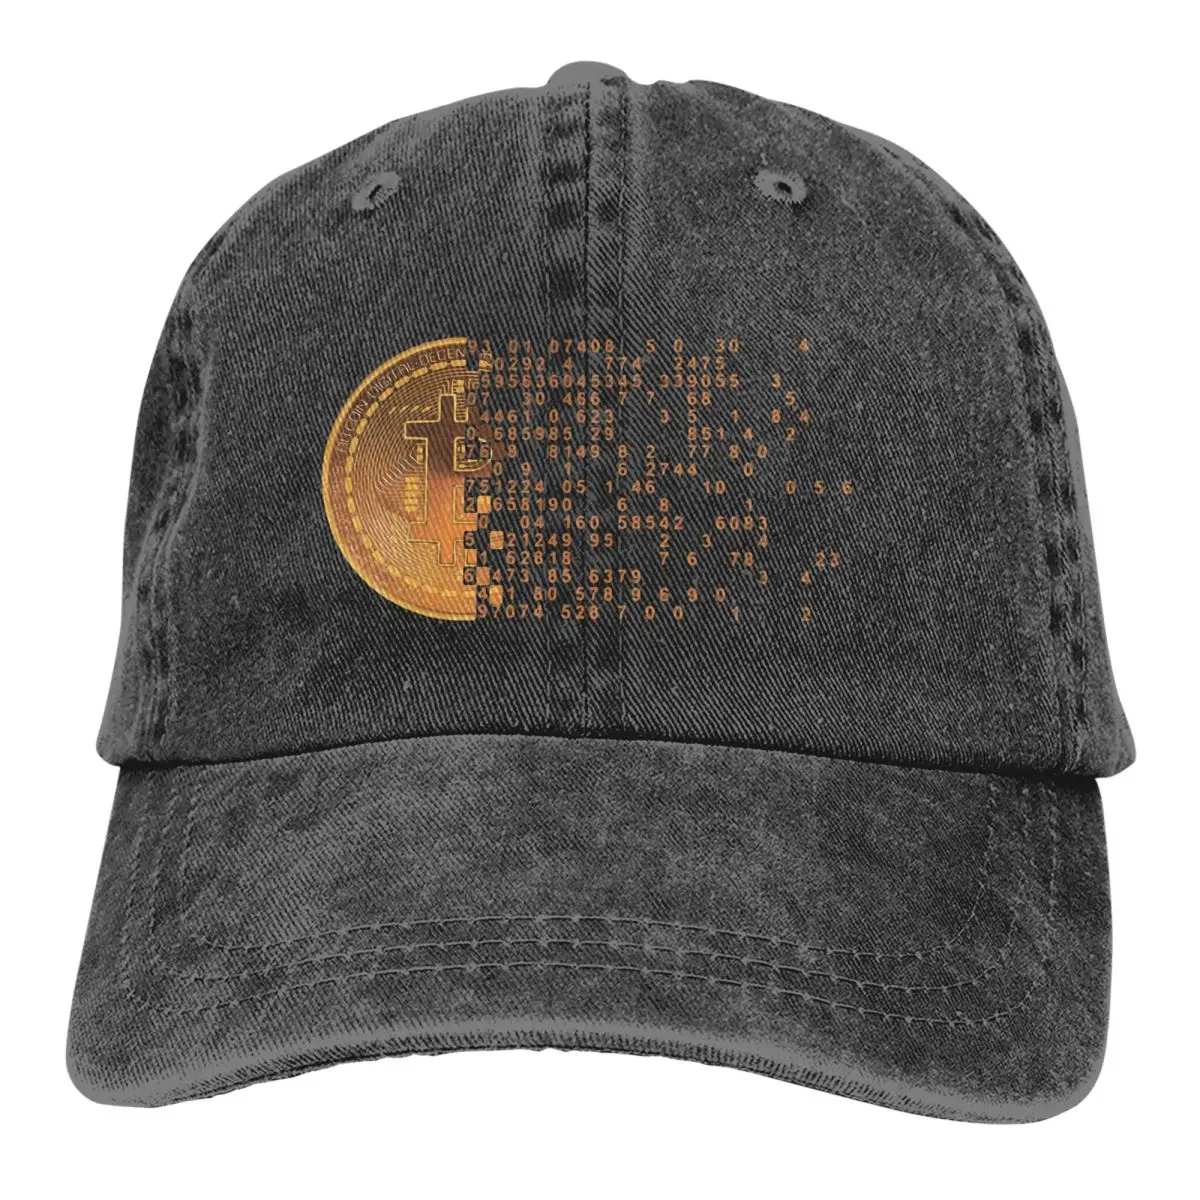 

Golden Baseball Caps Peaked Cap Bitcoin Cryptocurrency Miners Meme Sun Shade Hats for Men